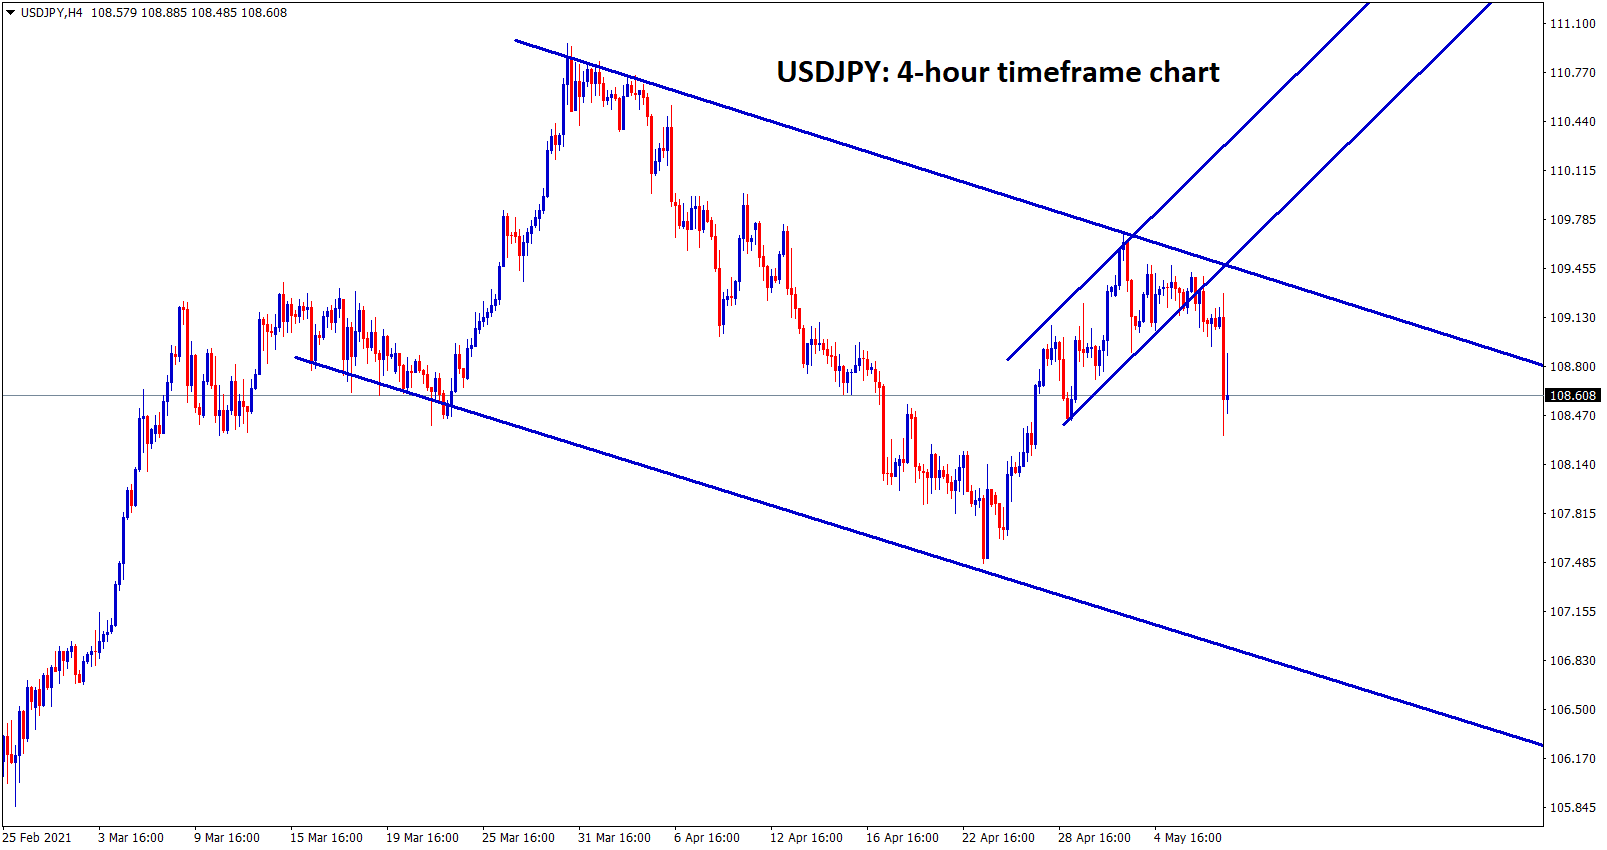 USDJPY broken the bottom level of the minor channel and starts to fall from the top of the descending channel.